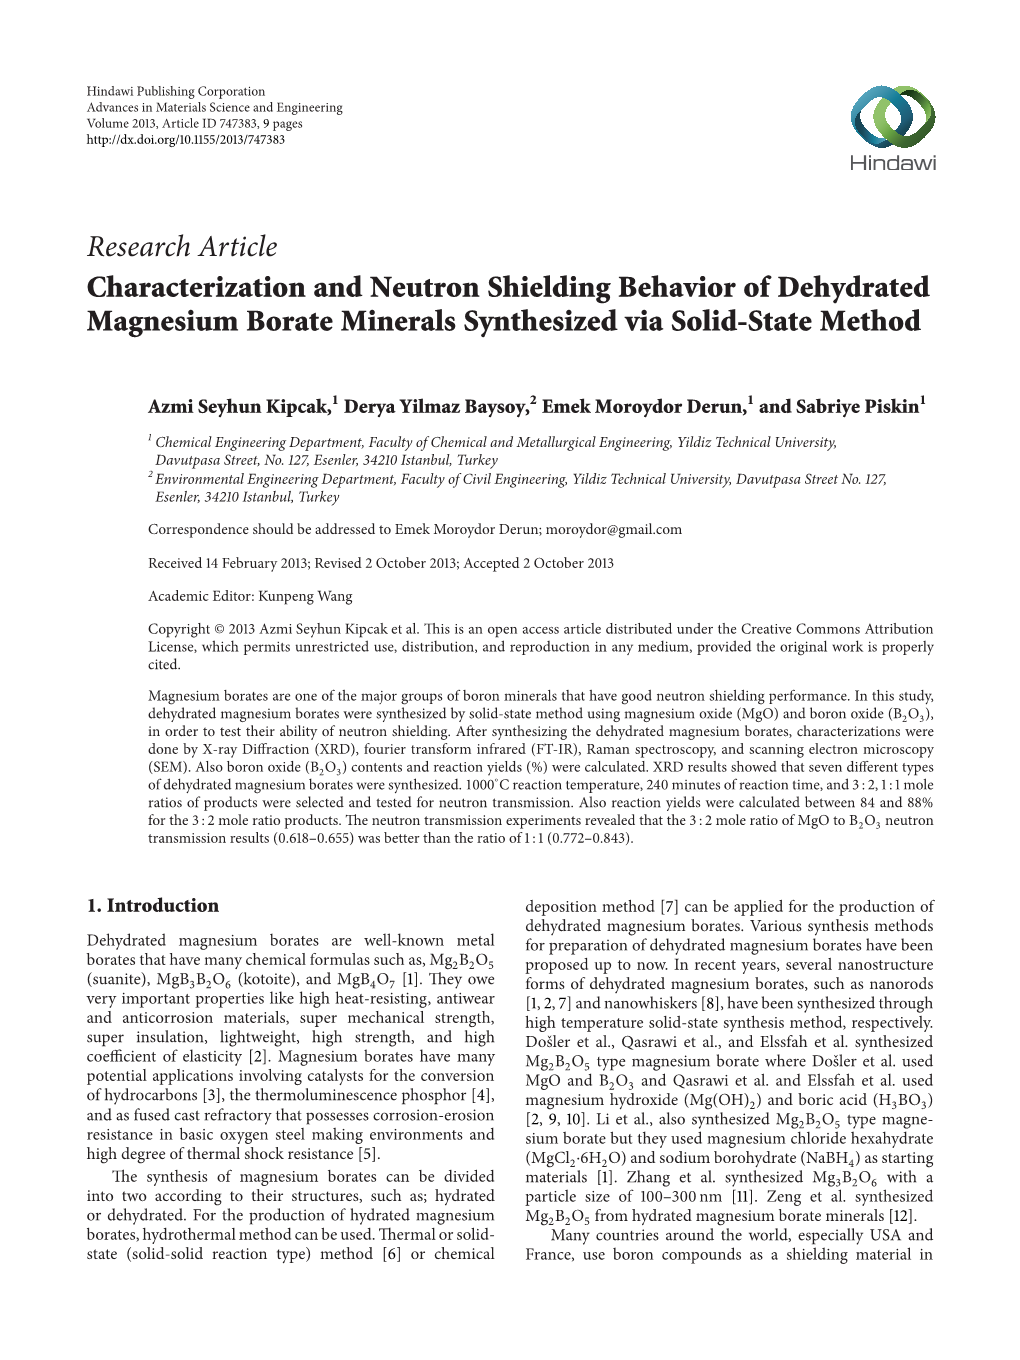 Characterization and Neutron Shielding Behavior of Dehydrated Magnesium Borate Minerals Synthesized Via Solid-State Method